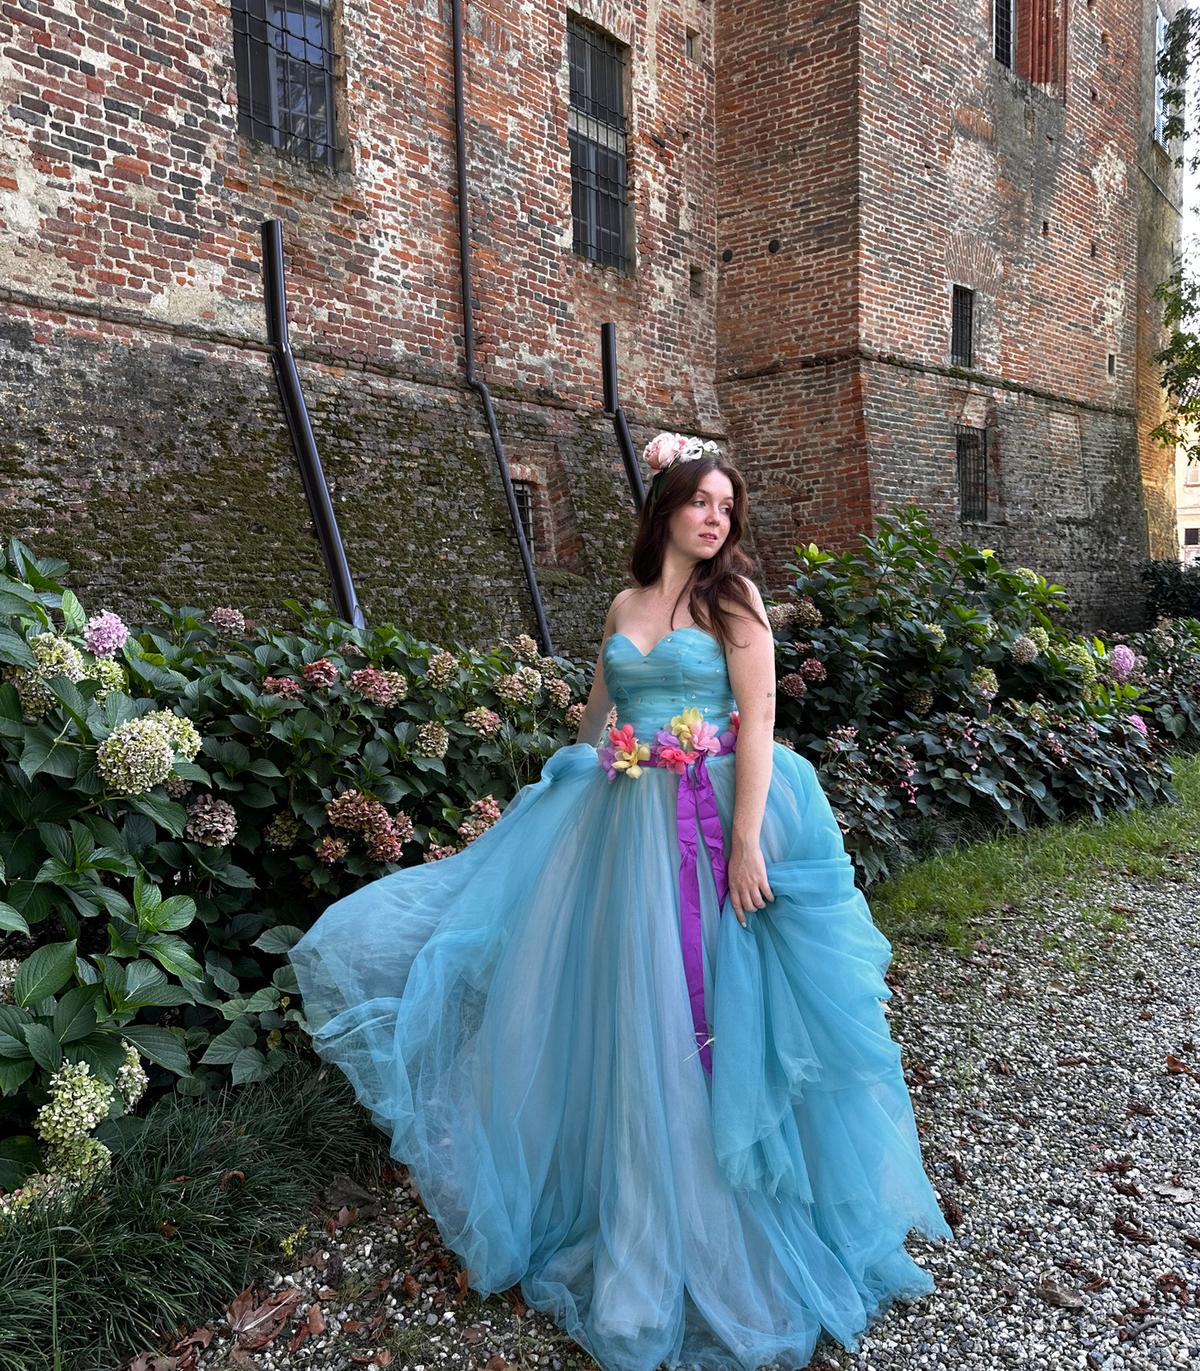 Ms. Sannazzaro dons an extravagant gown and poses for a picture outside the castle. (Courtesy of <a href="https://www.instagram.com/thecastlediary/?hl=en">Ludovica Sannazzaro</a>)